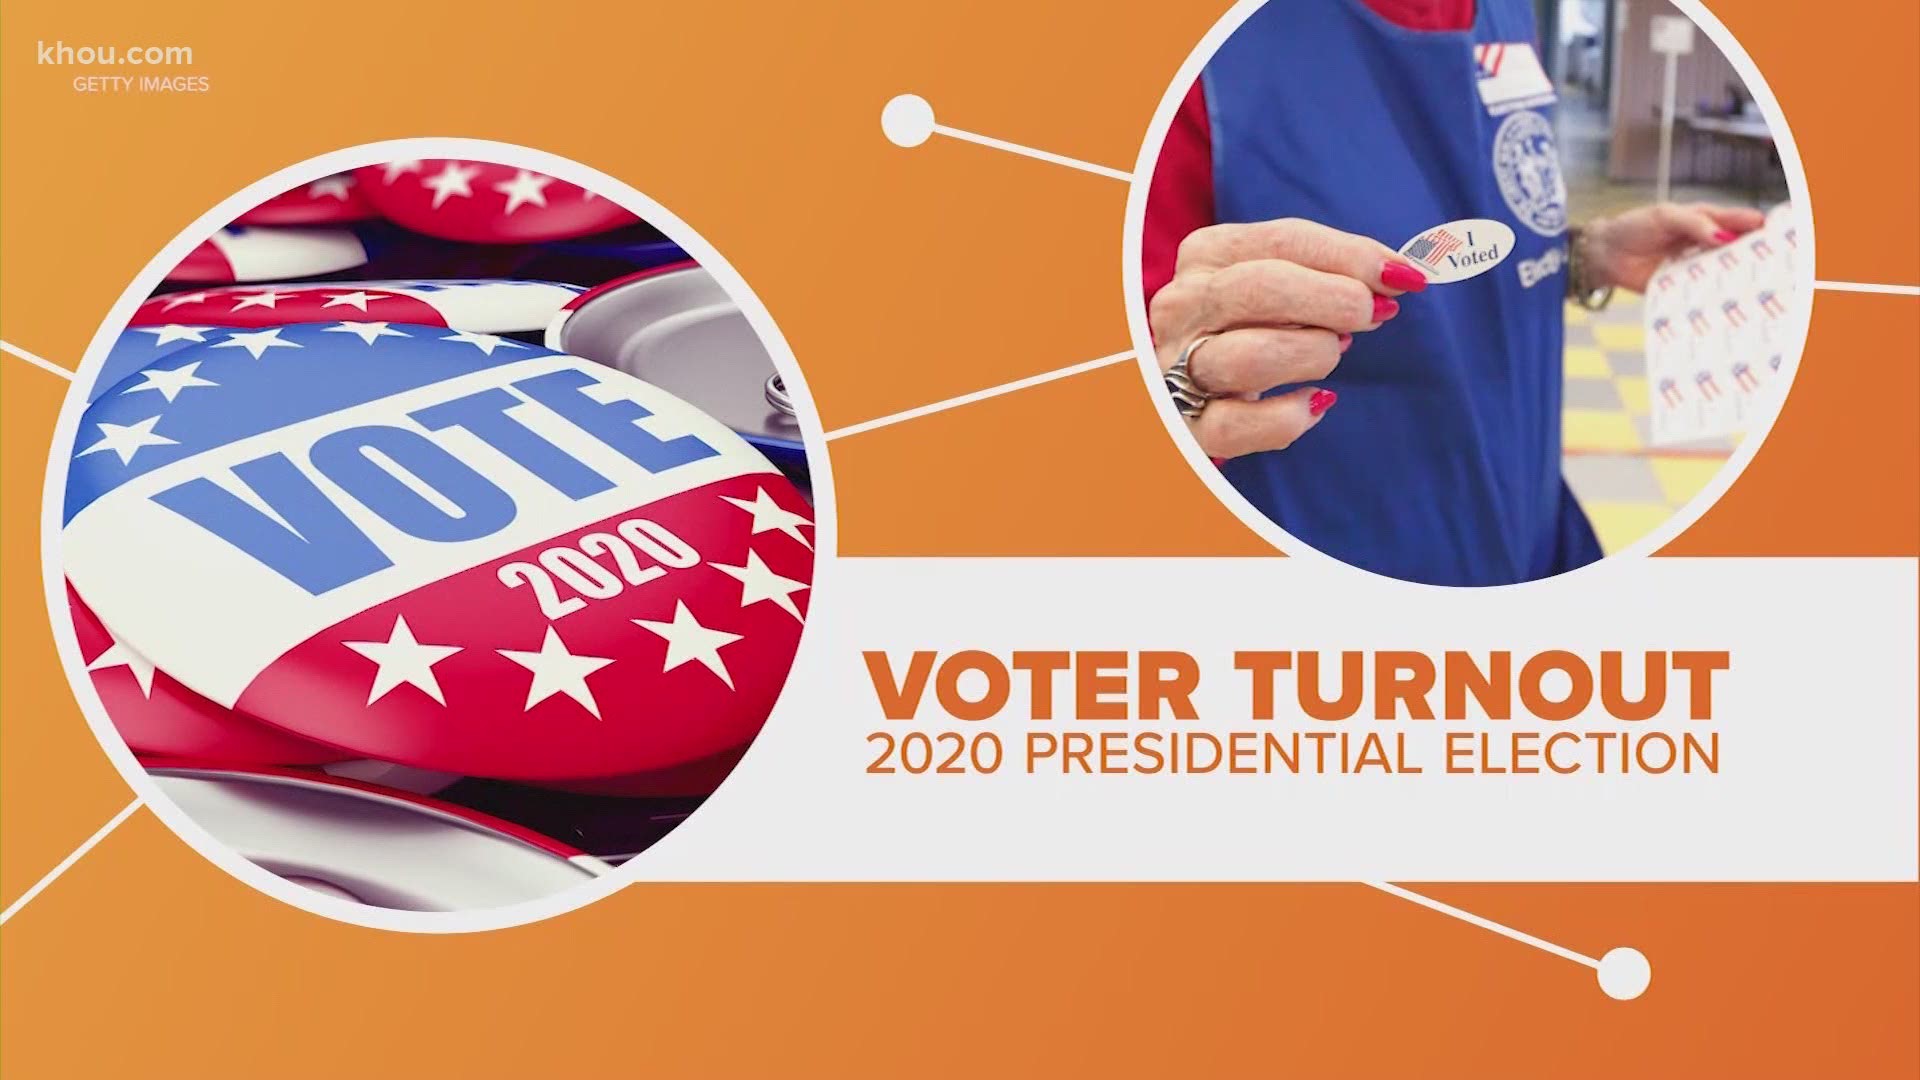 Voter turnout will play a major role in the 2020 presidential election as COVID-19 expands voting options and voters harbor strong feelings about President Trump.